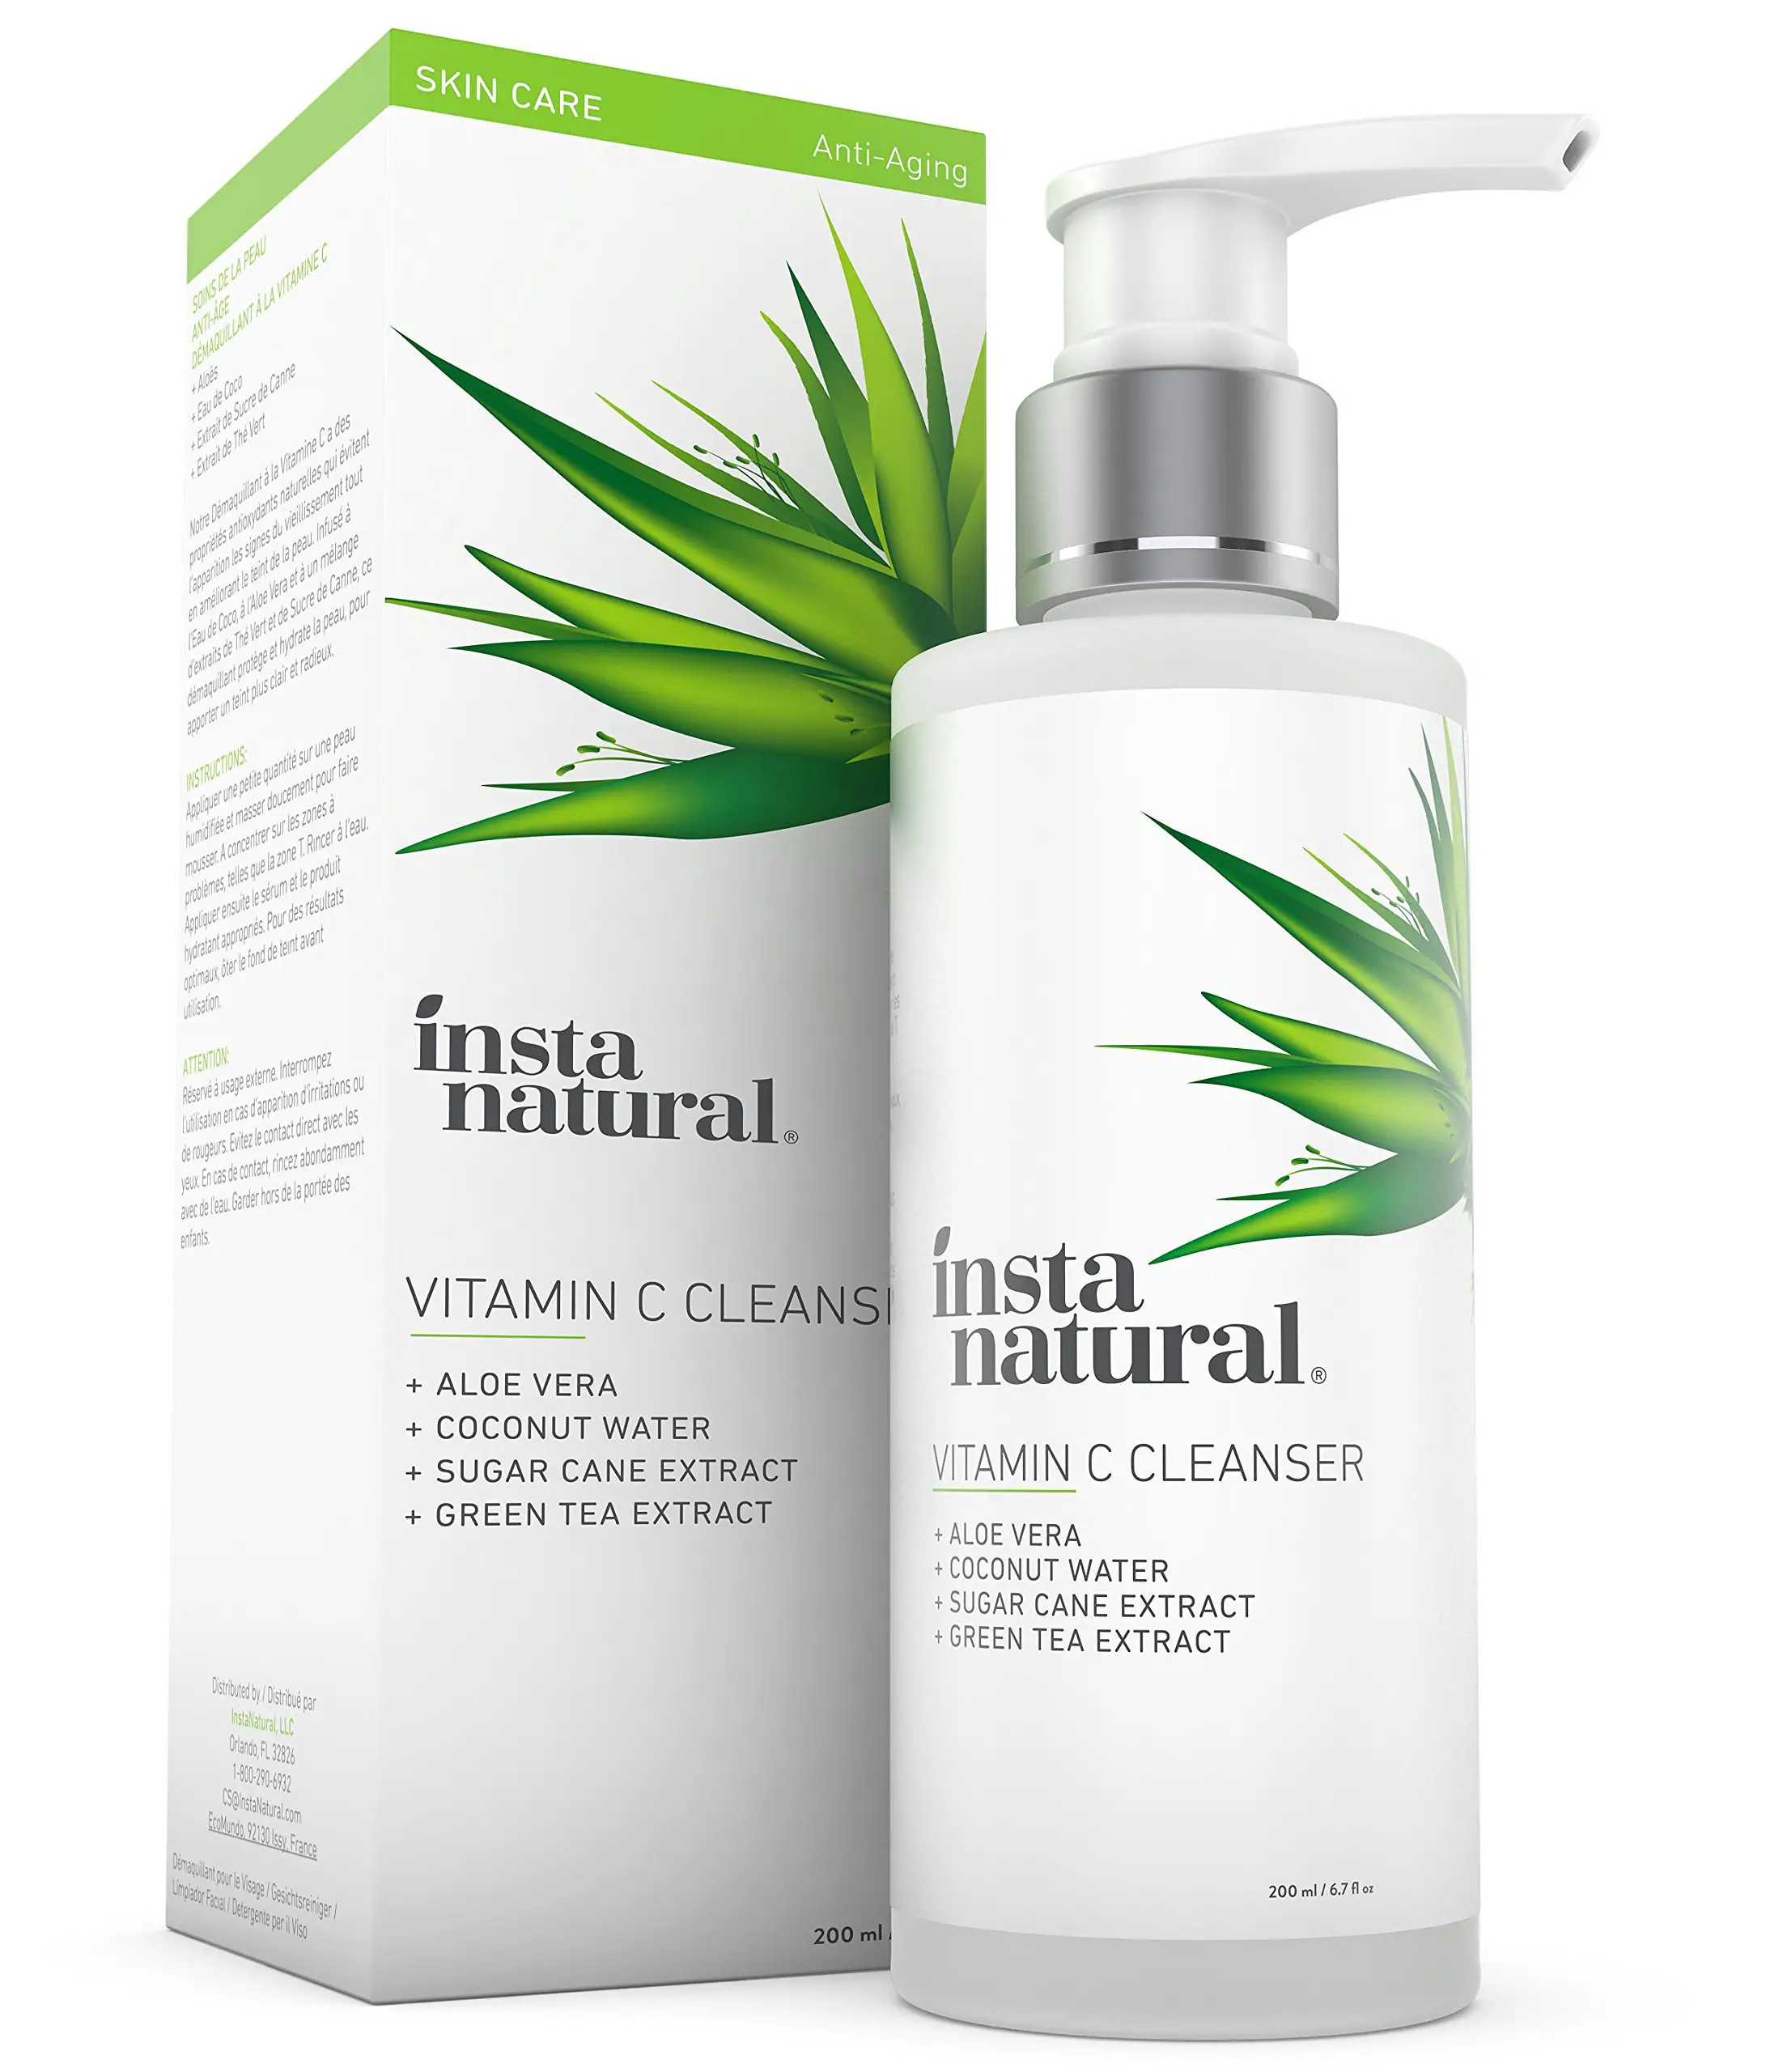 Vitamin C Facial Cleanser Exfoliating Face Wash Best Antiaging Breakout ...